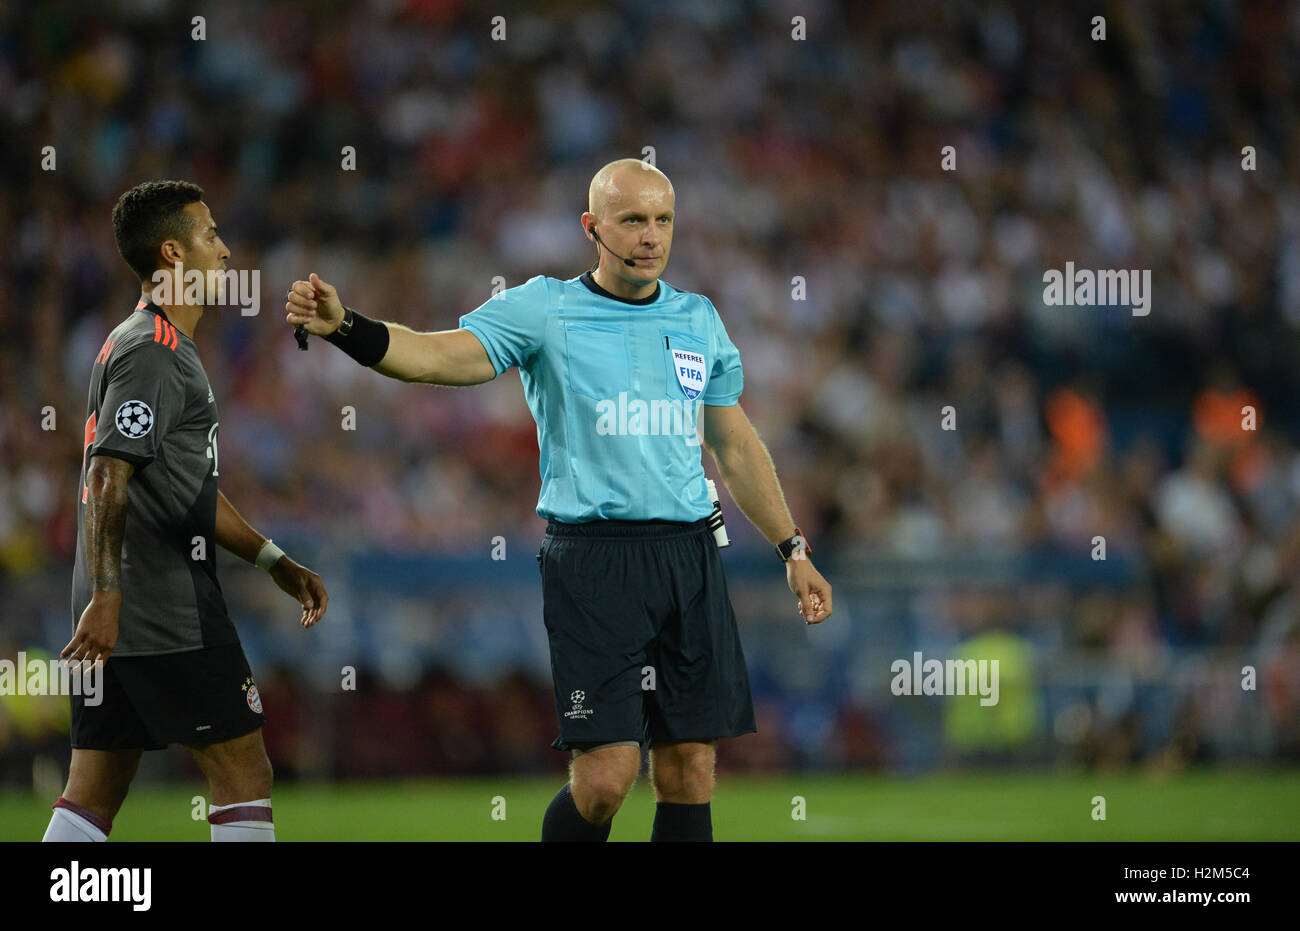 Madrid, Spain. 28th Sep, 2016. Referee Szymon Marciniak gesticulates during the match of Atlético Madrid against Bavaria Munich on the second match day of the Champions League, group phase, group D, at the Vincente Calderón Stadium in Madrid, Spain, 28 September 2016. PHOTO: ANDREAS GEBERT EPA/dpa/Alamy Live News Stock Photo